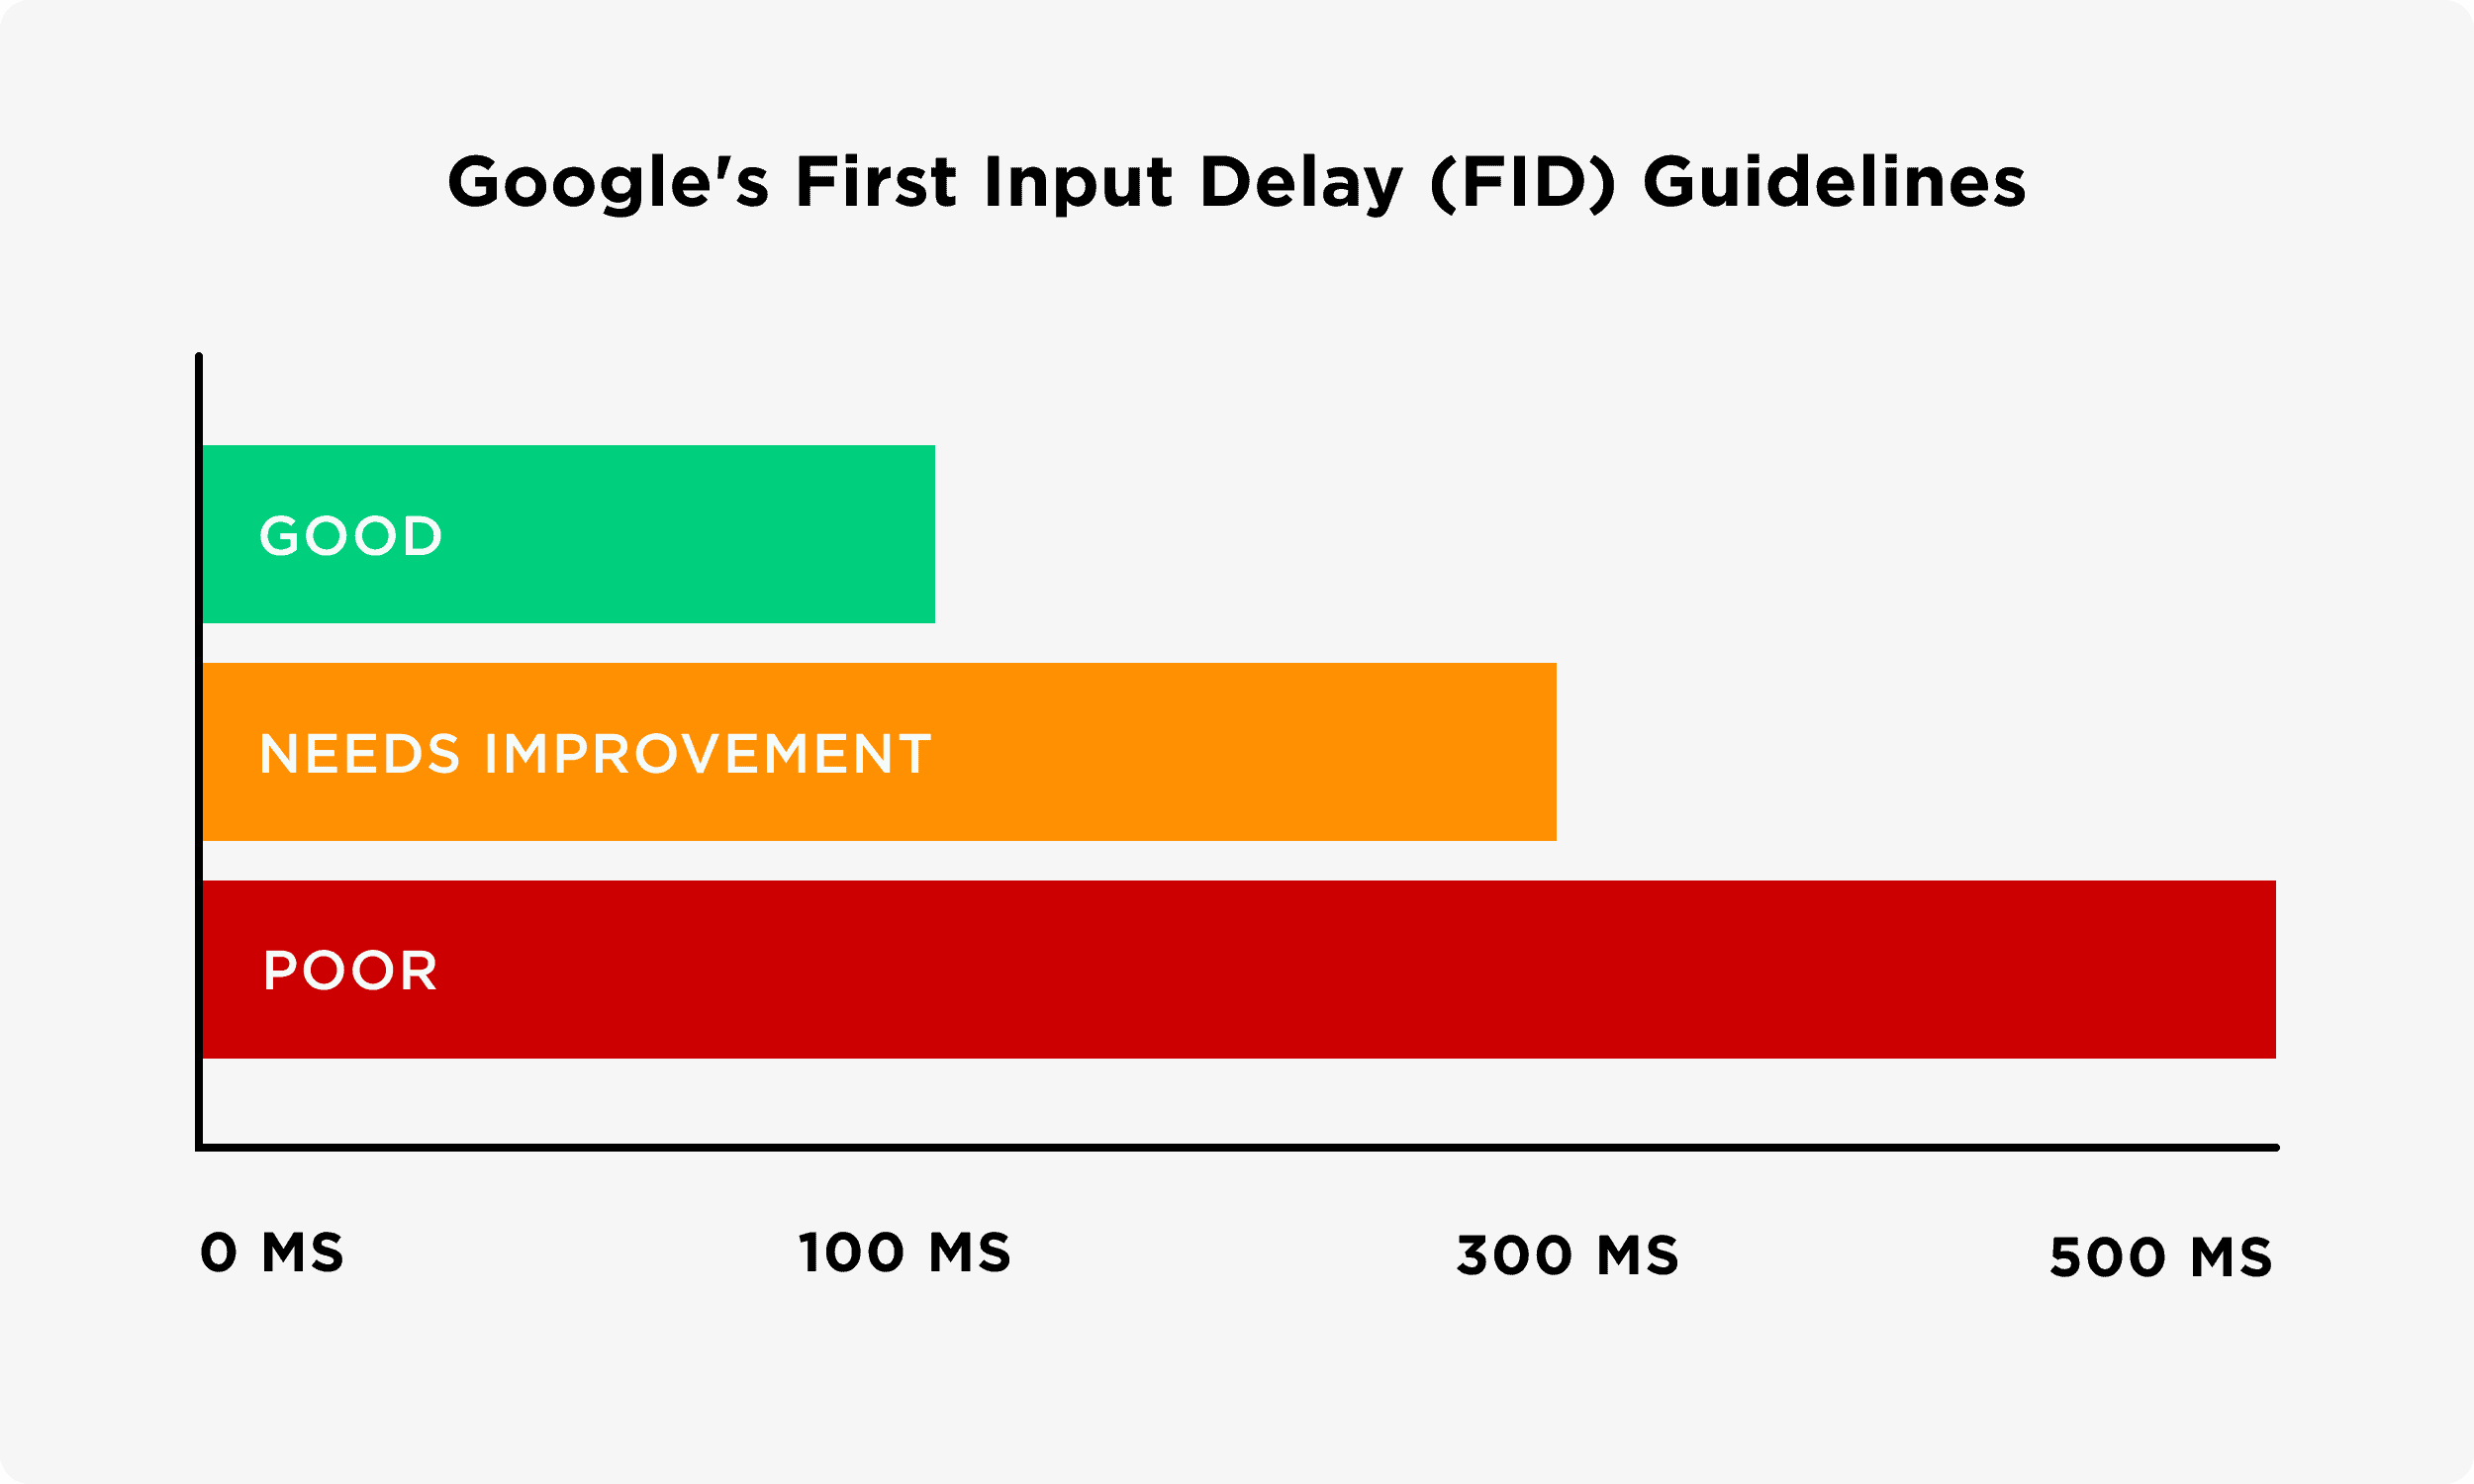 Google's first input delay guidelines